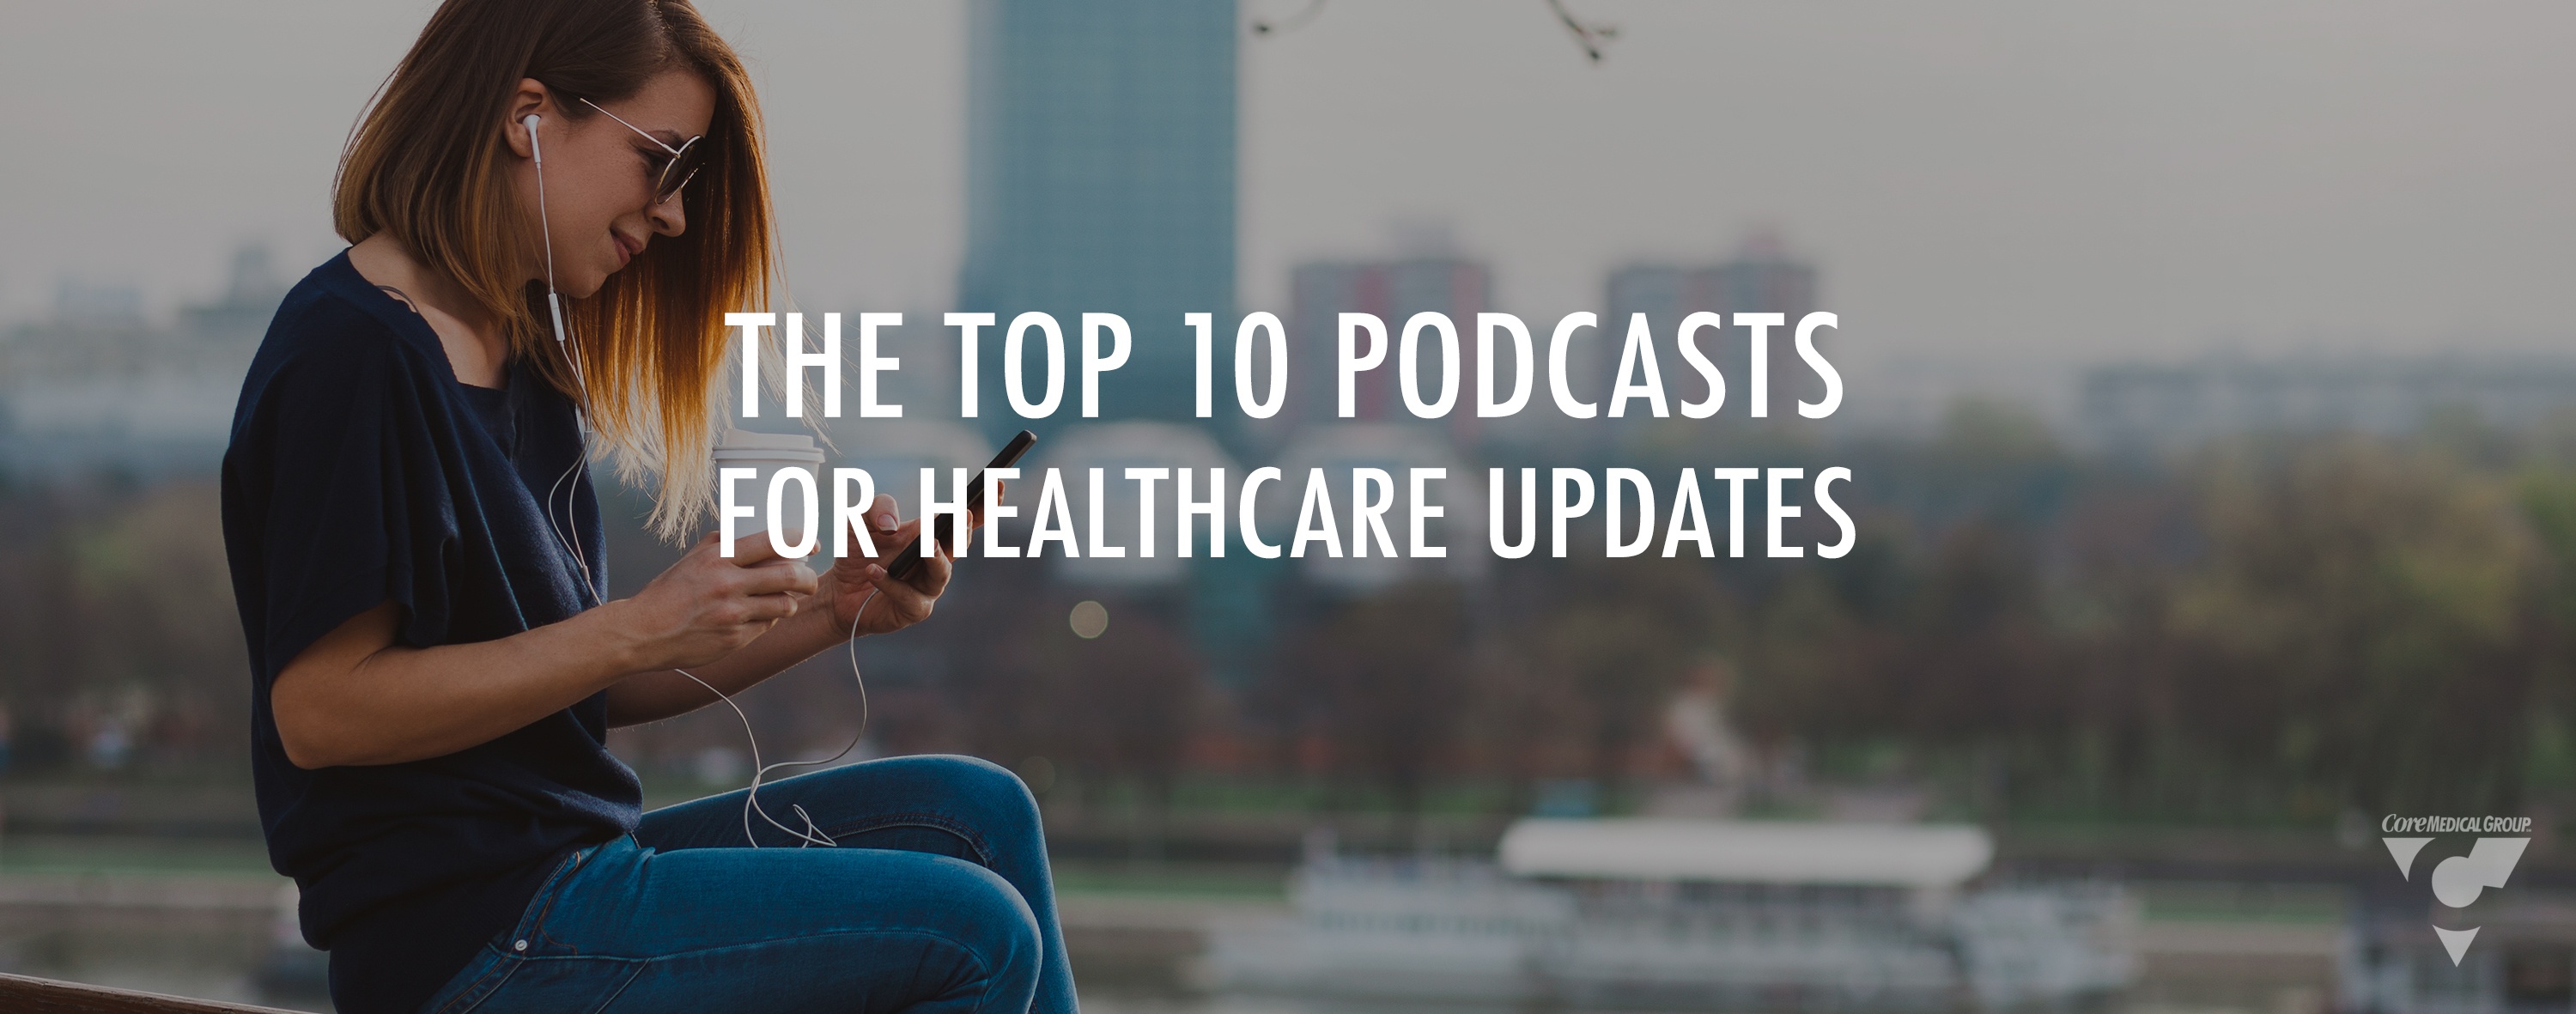 CMG_Blog_The Top 10 Podcasts for Healthcare Updates_R1_Blog